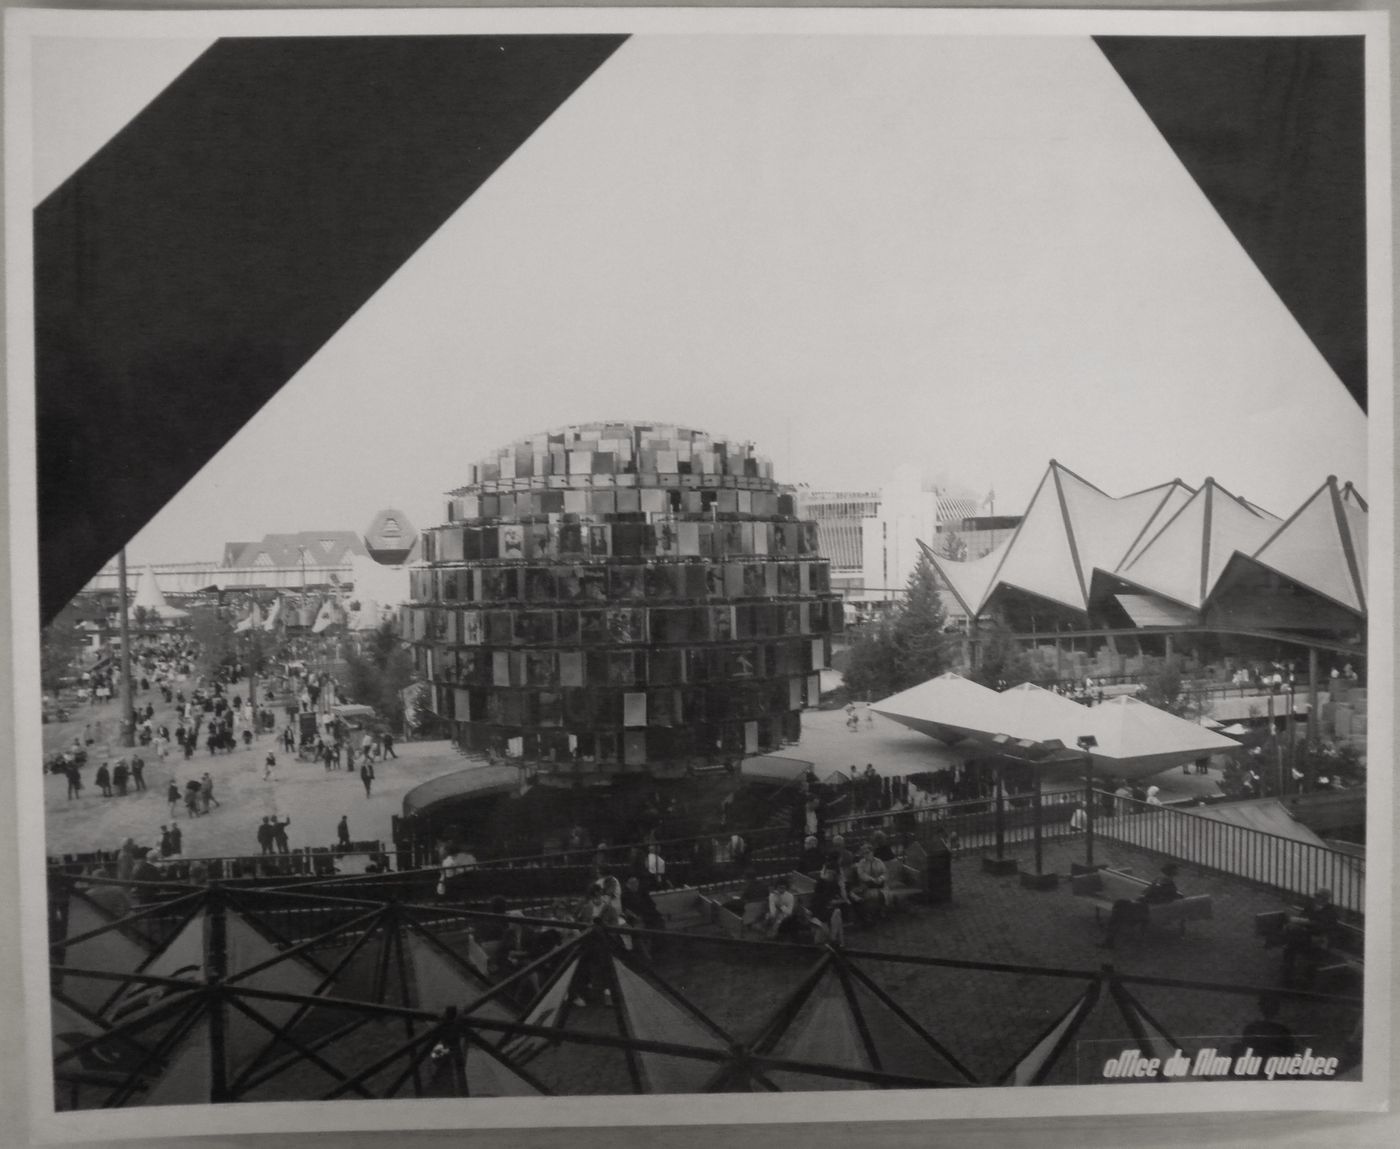 View of the People of Canada Tree at the Canada's Pavilion with the Ontario Pavilion on the right, Expo 67, Montréal, Québec